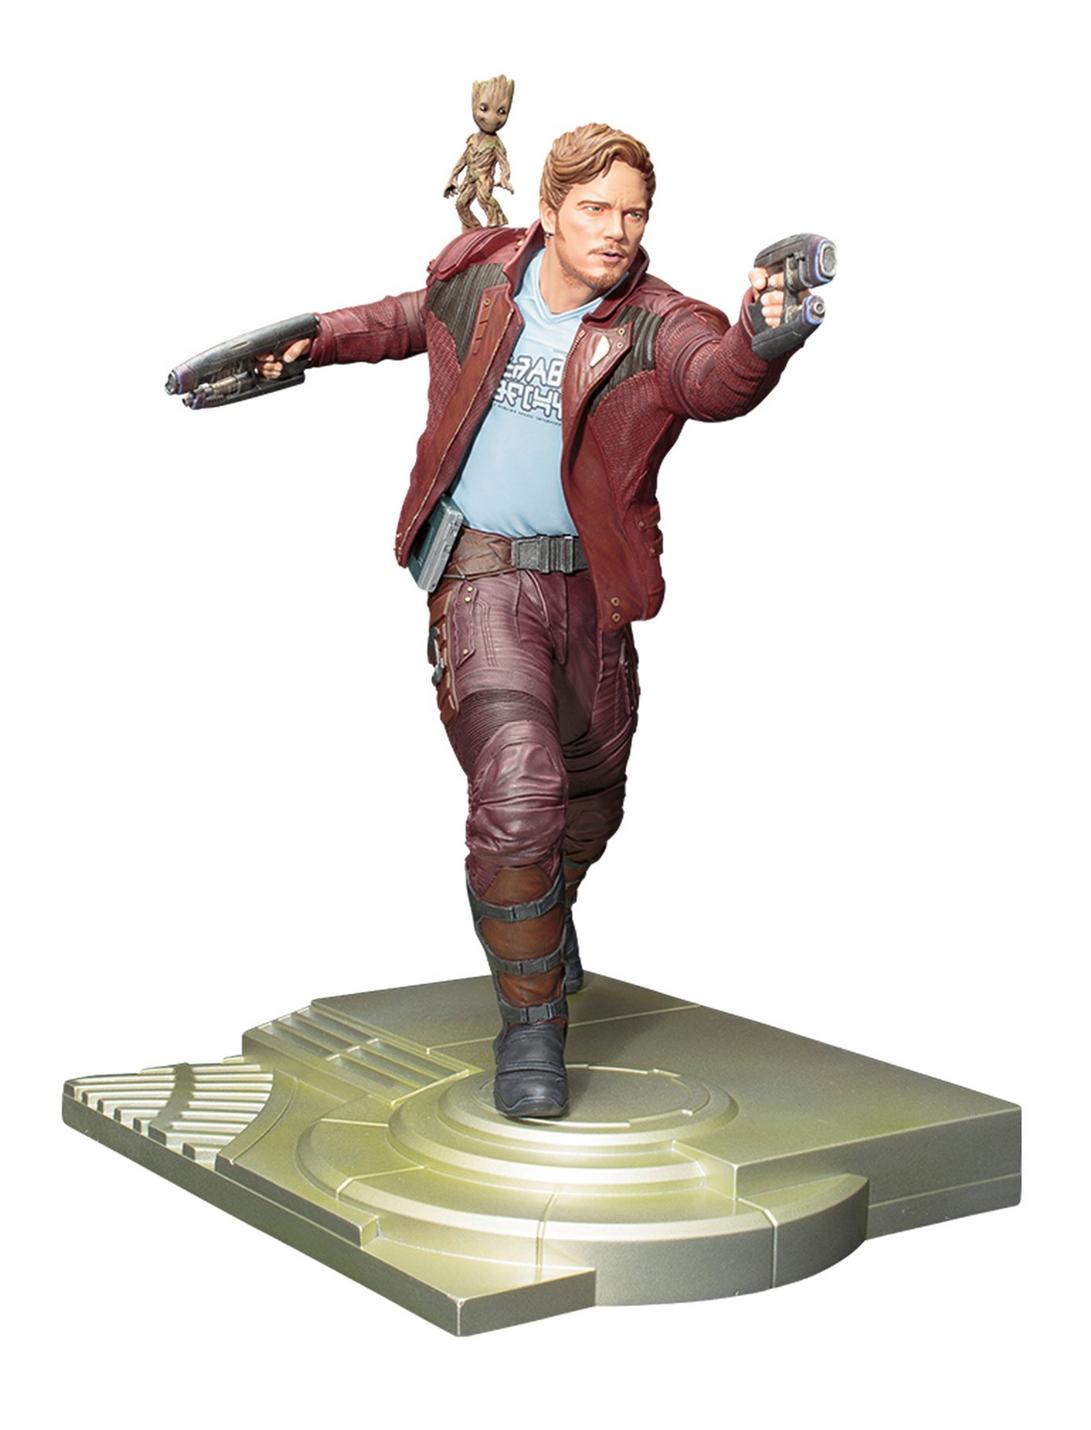 Marvel Guardians Of The Galaxy Vol. 2 Star-Lord With Groot ARTFX Figure, , hi-res